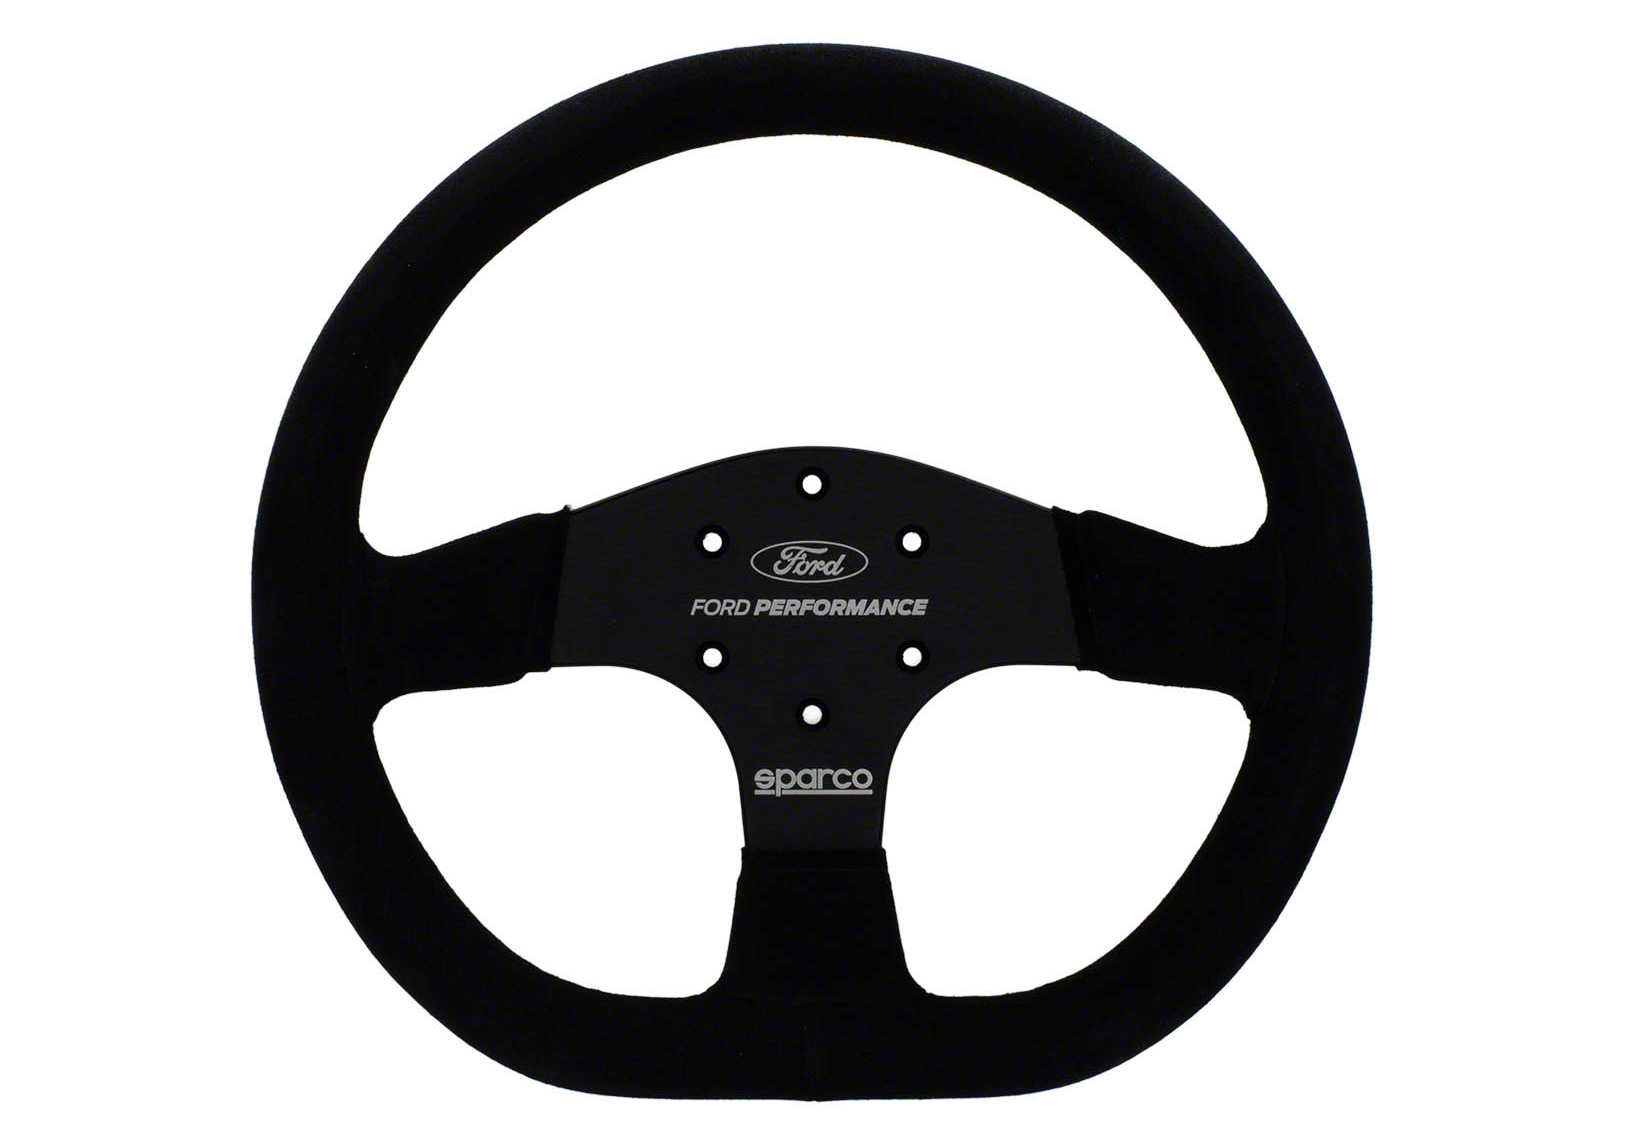 FORD PERFORMANCE STEERING WHEEL - OFF-ROAD| Part Details for M